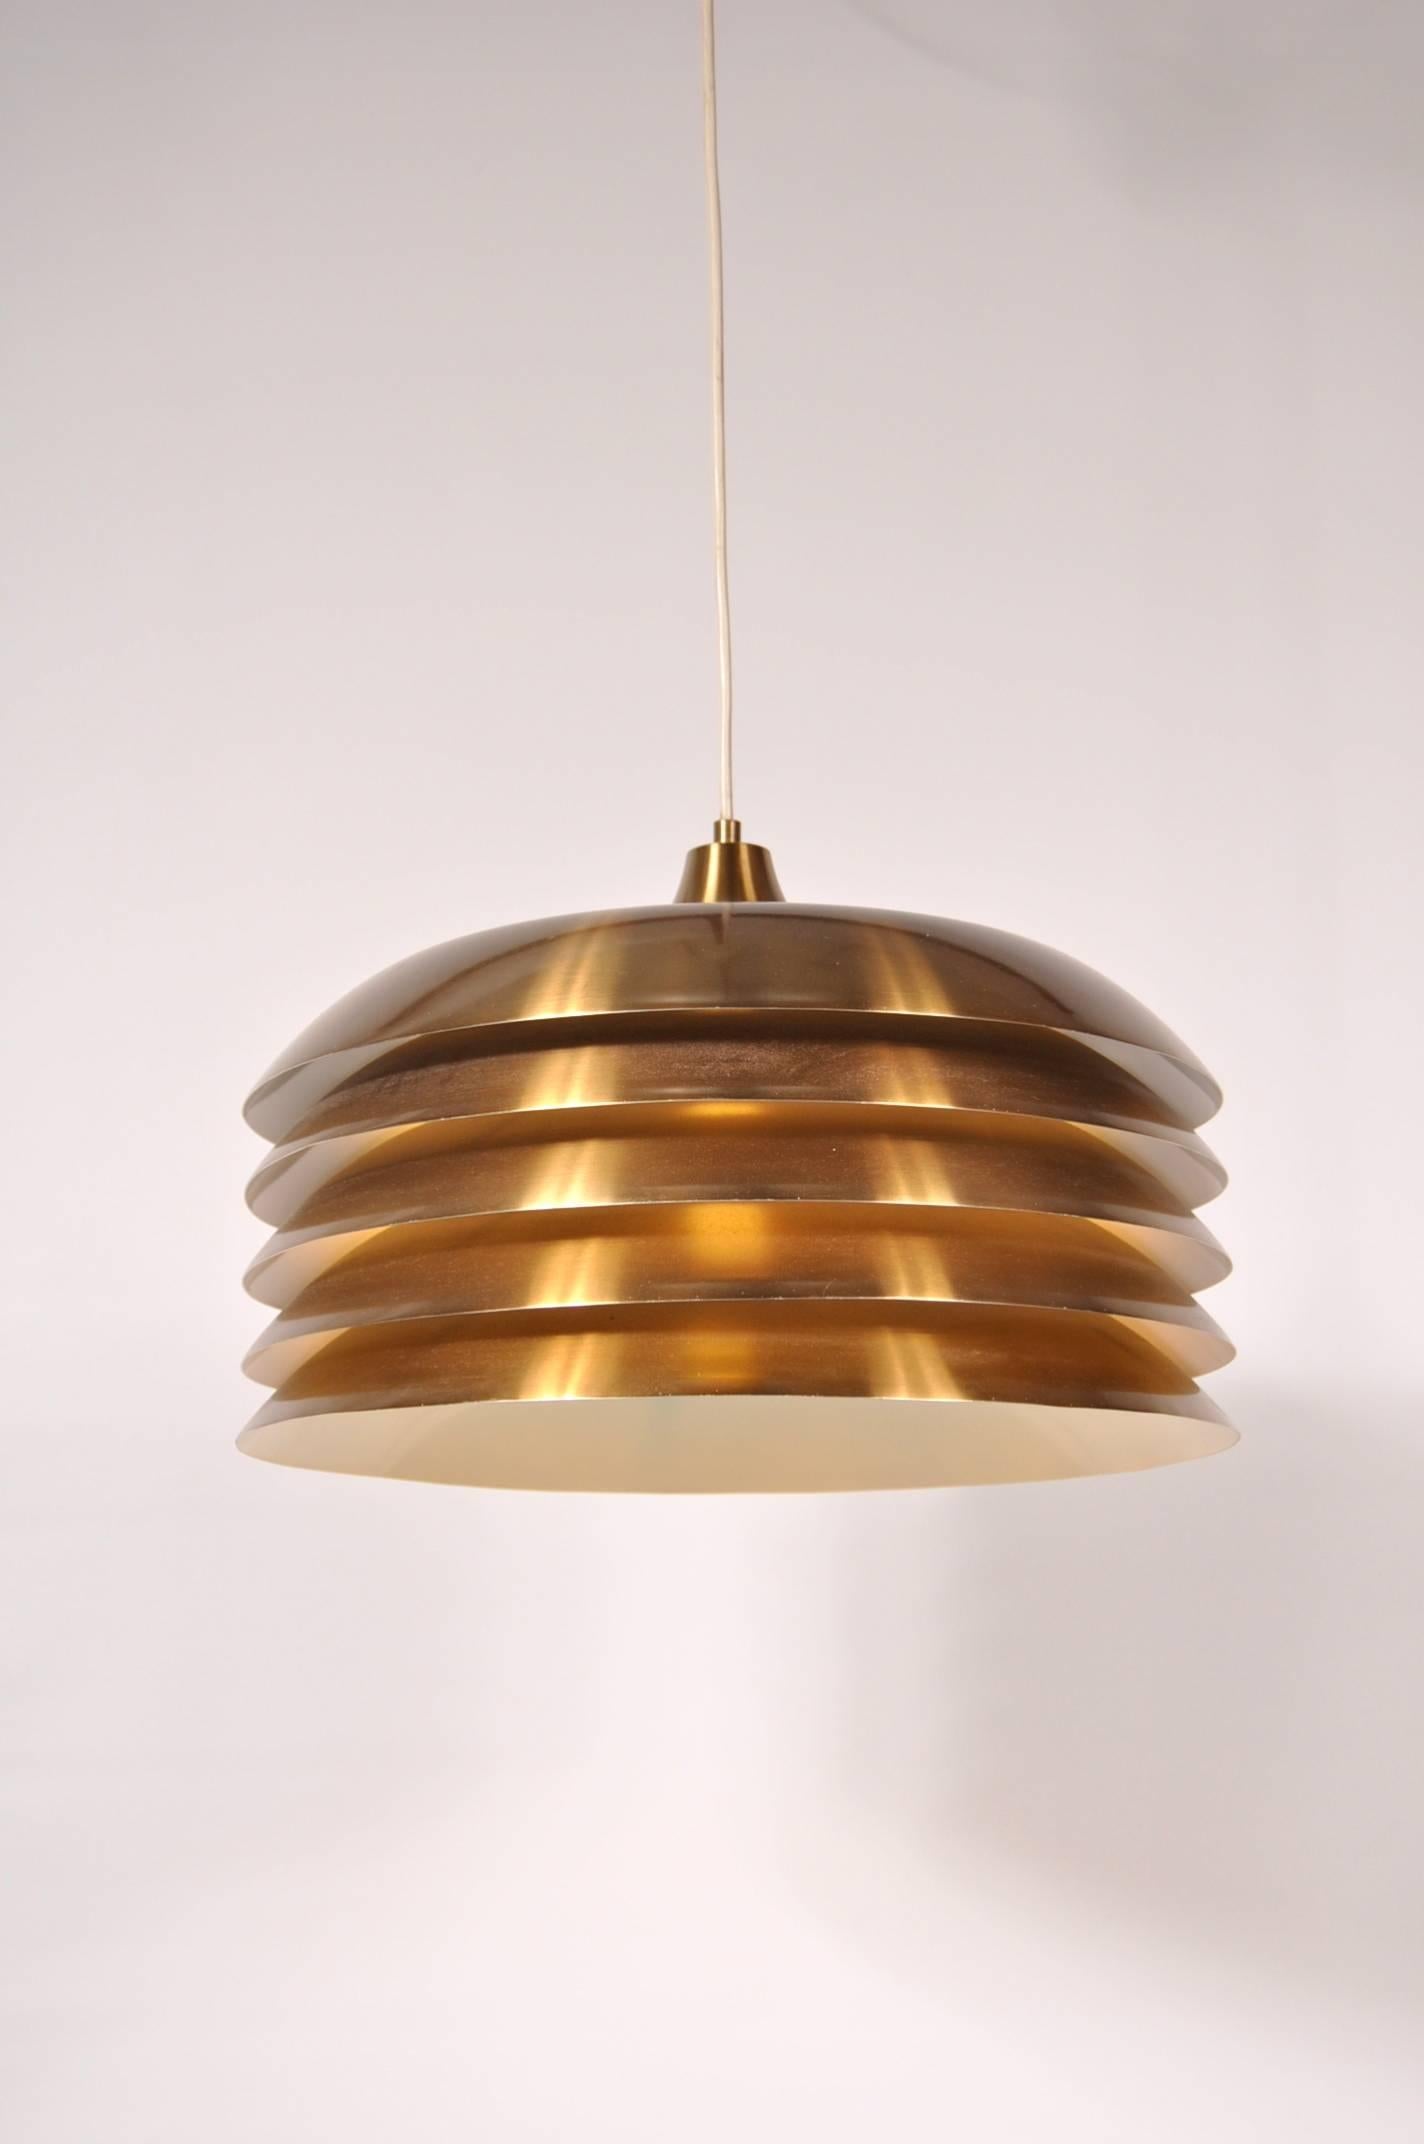 Stunning hanging lamp designed by Hans-Agne Jakobsson, manufactured by AB Markaryd in Sweden, circa 1960.

This amazing lamp is made of beautiful quality brass. It has a five-layered hood, making it a highly recognizable Jakobsson piece. This